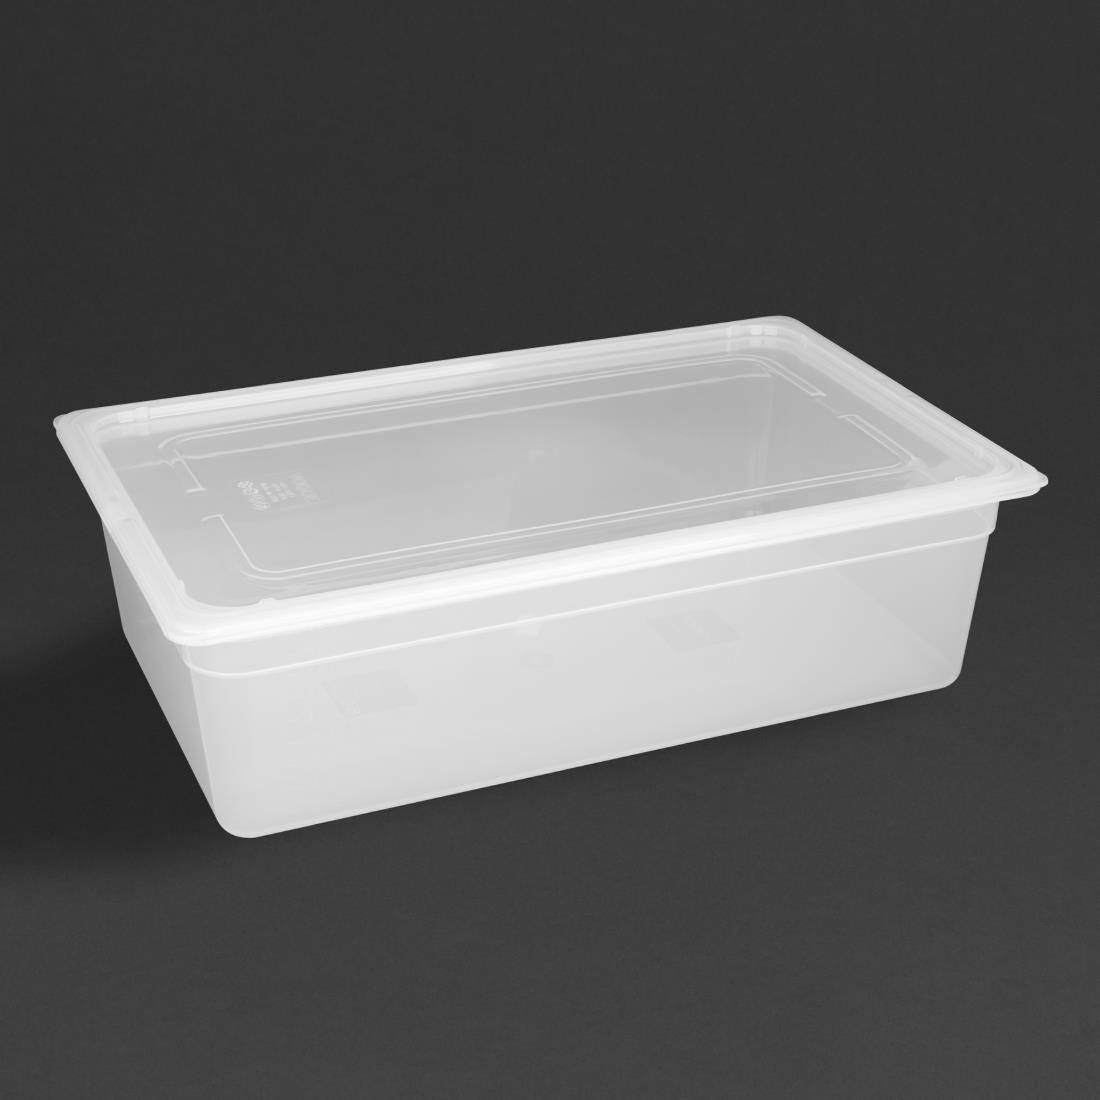 GJ512 Vogue Polypropylene 1/1 Gastronorm Container with Lid 150mm (Pack of 2) JD Catering Equipment Solutions Ltd